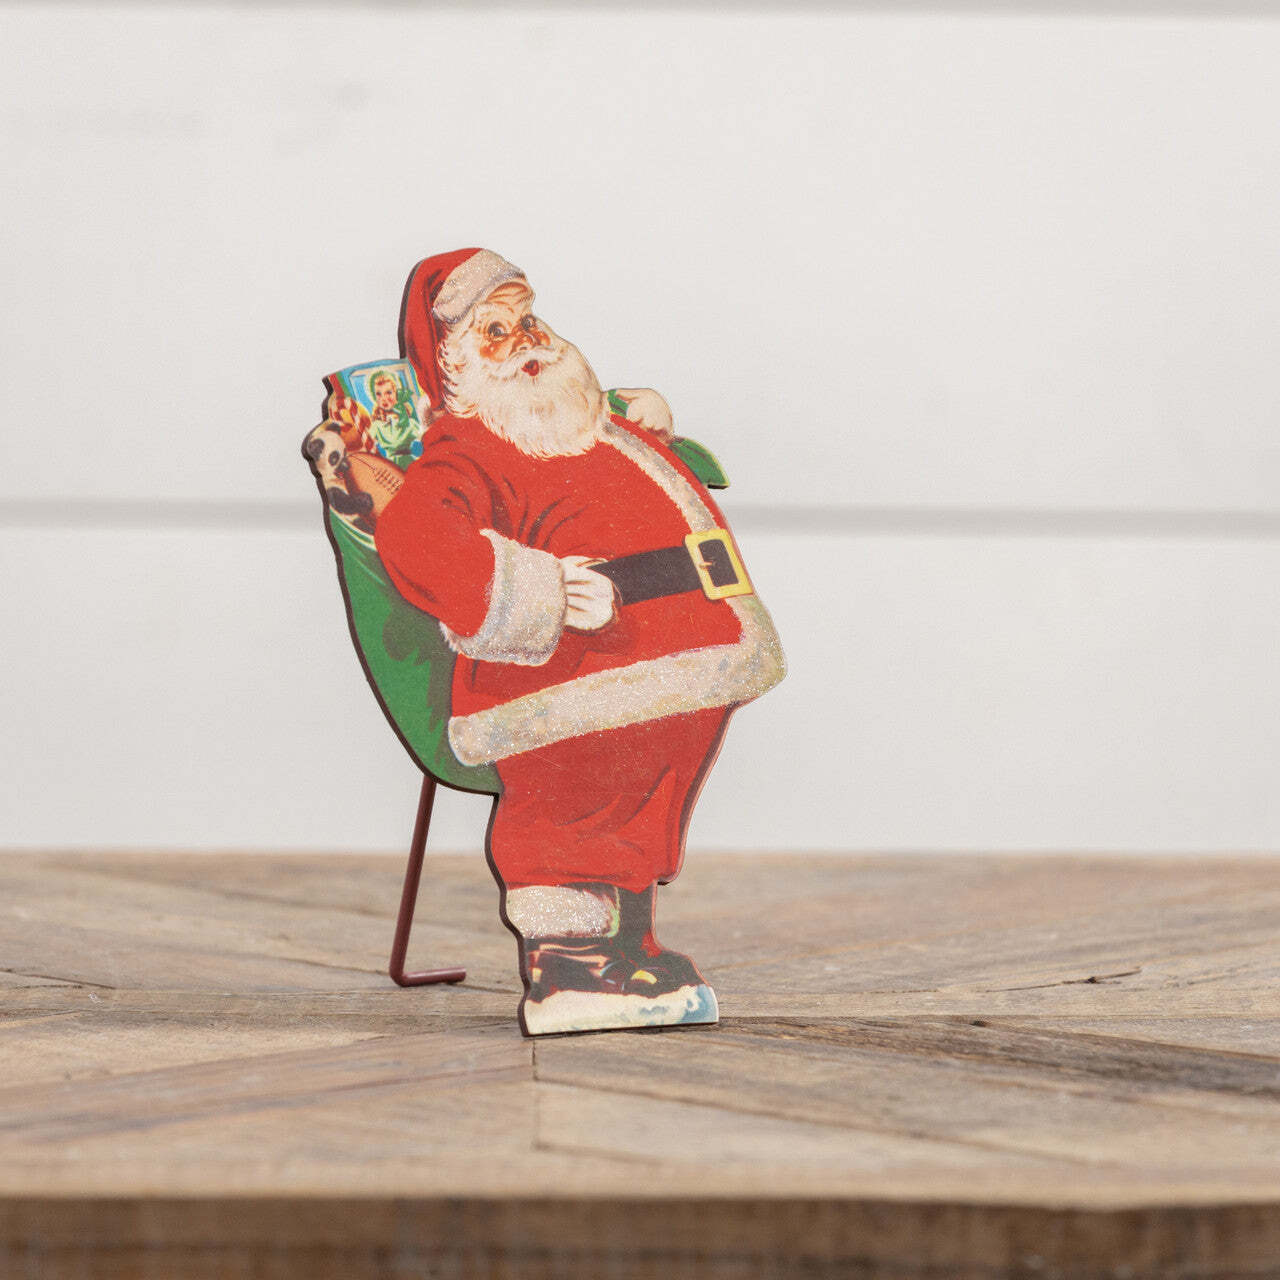 Vintage-Inspired Santa Claus with Bag Dummy Board